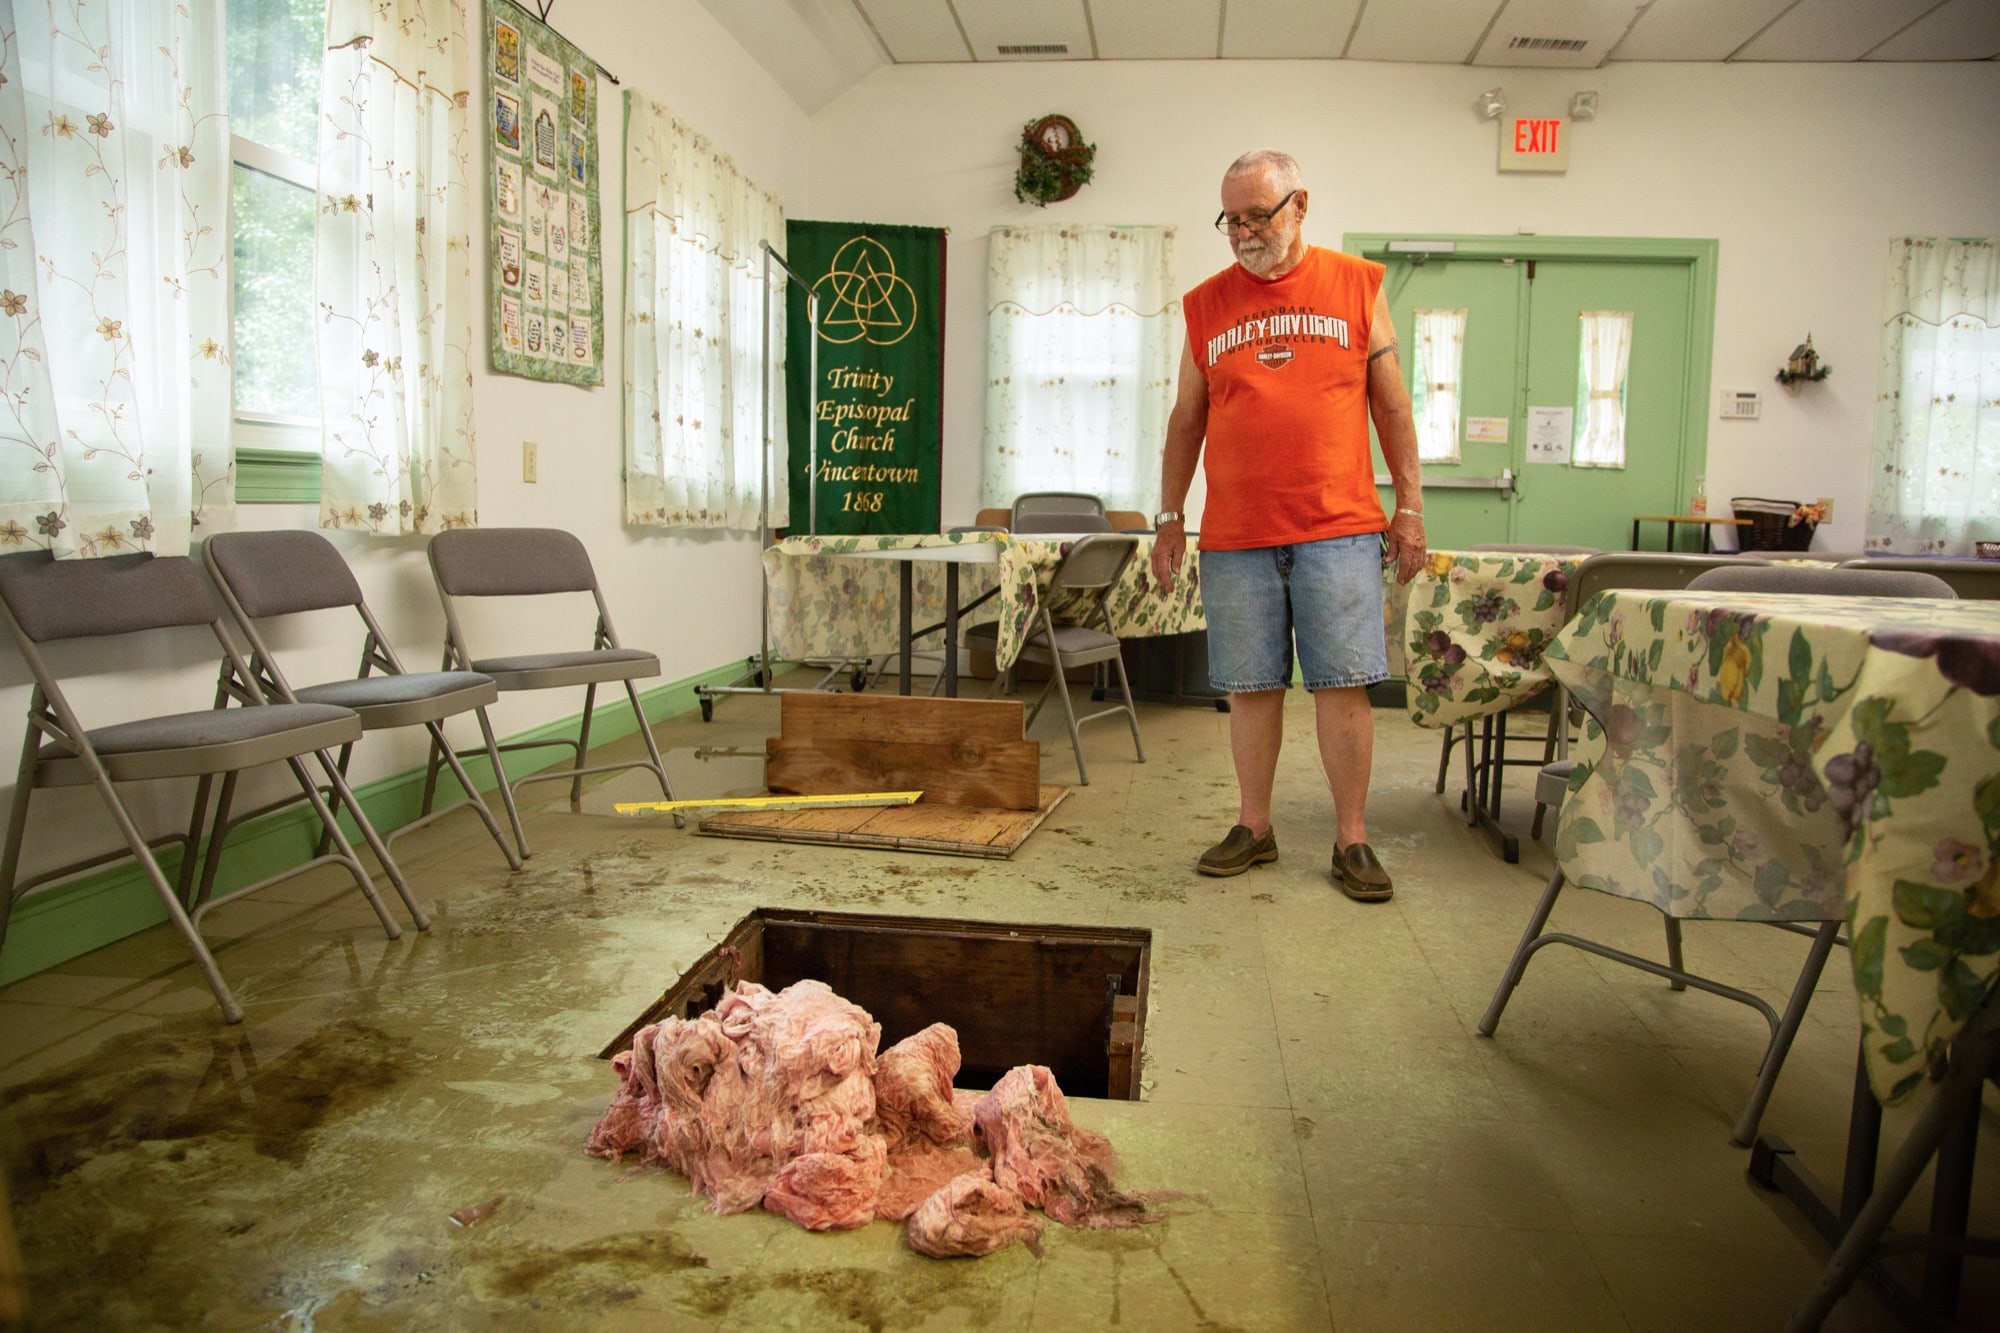 Tom Bridge, 82, is the parish administrator of Trinity Episcopal Church in Vincentown, New Jersey. Flooding this summer caused extensive damage to the church hall, where a pile of soggy insulation remained weeks later. (Allie Barton/News21)